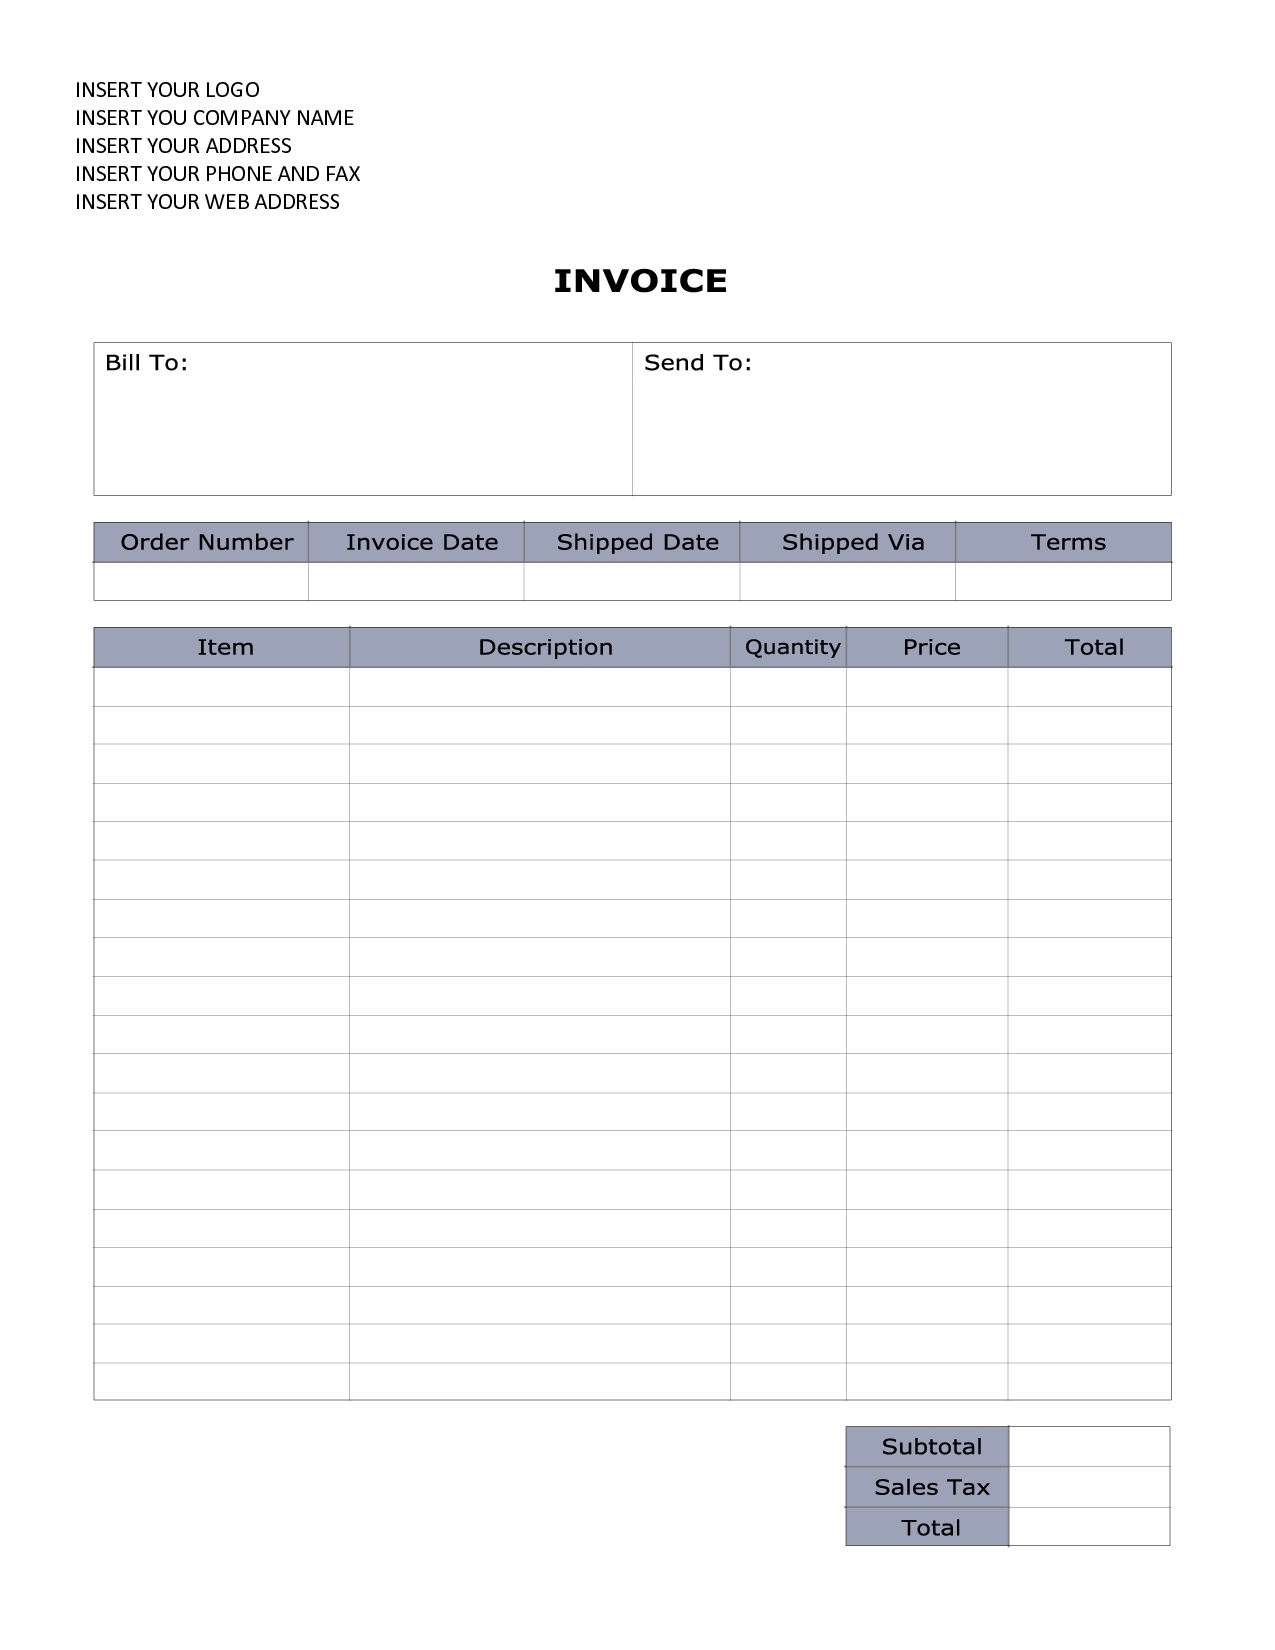 1000 images about invoice on pinterest shops words and for sale sample word invoice